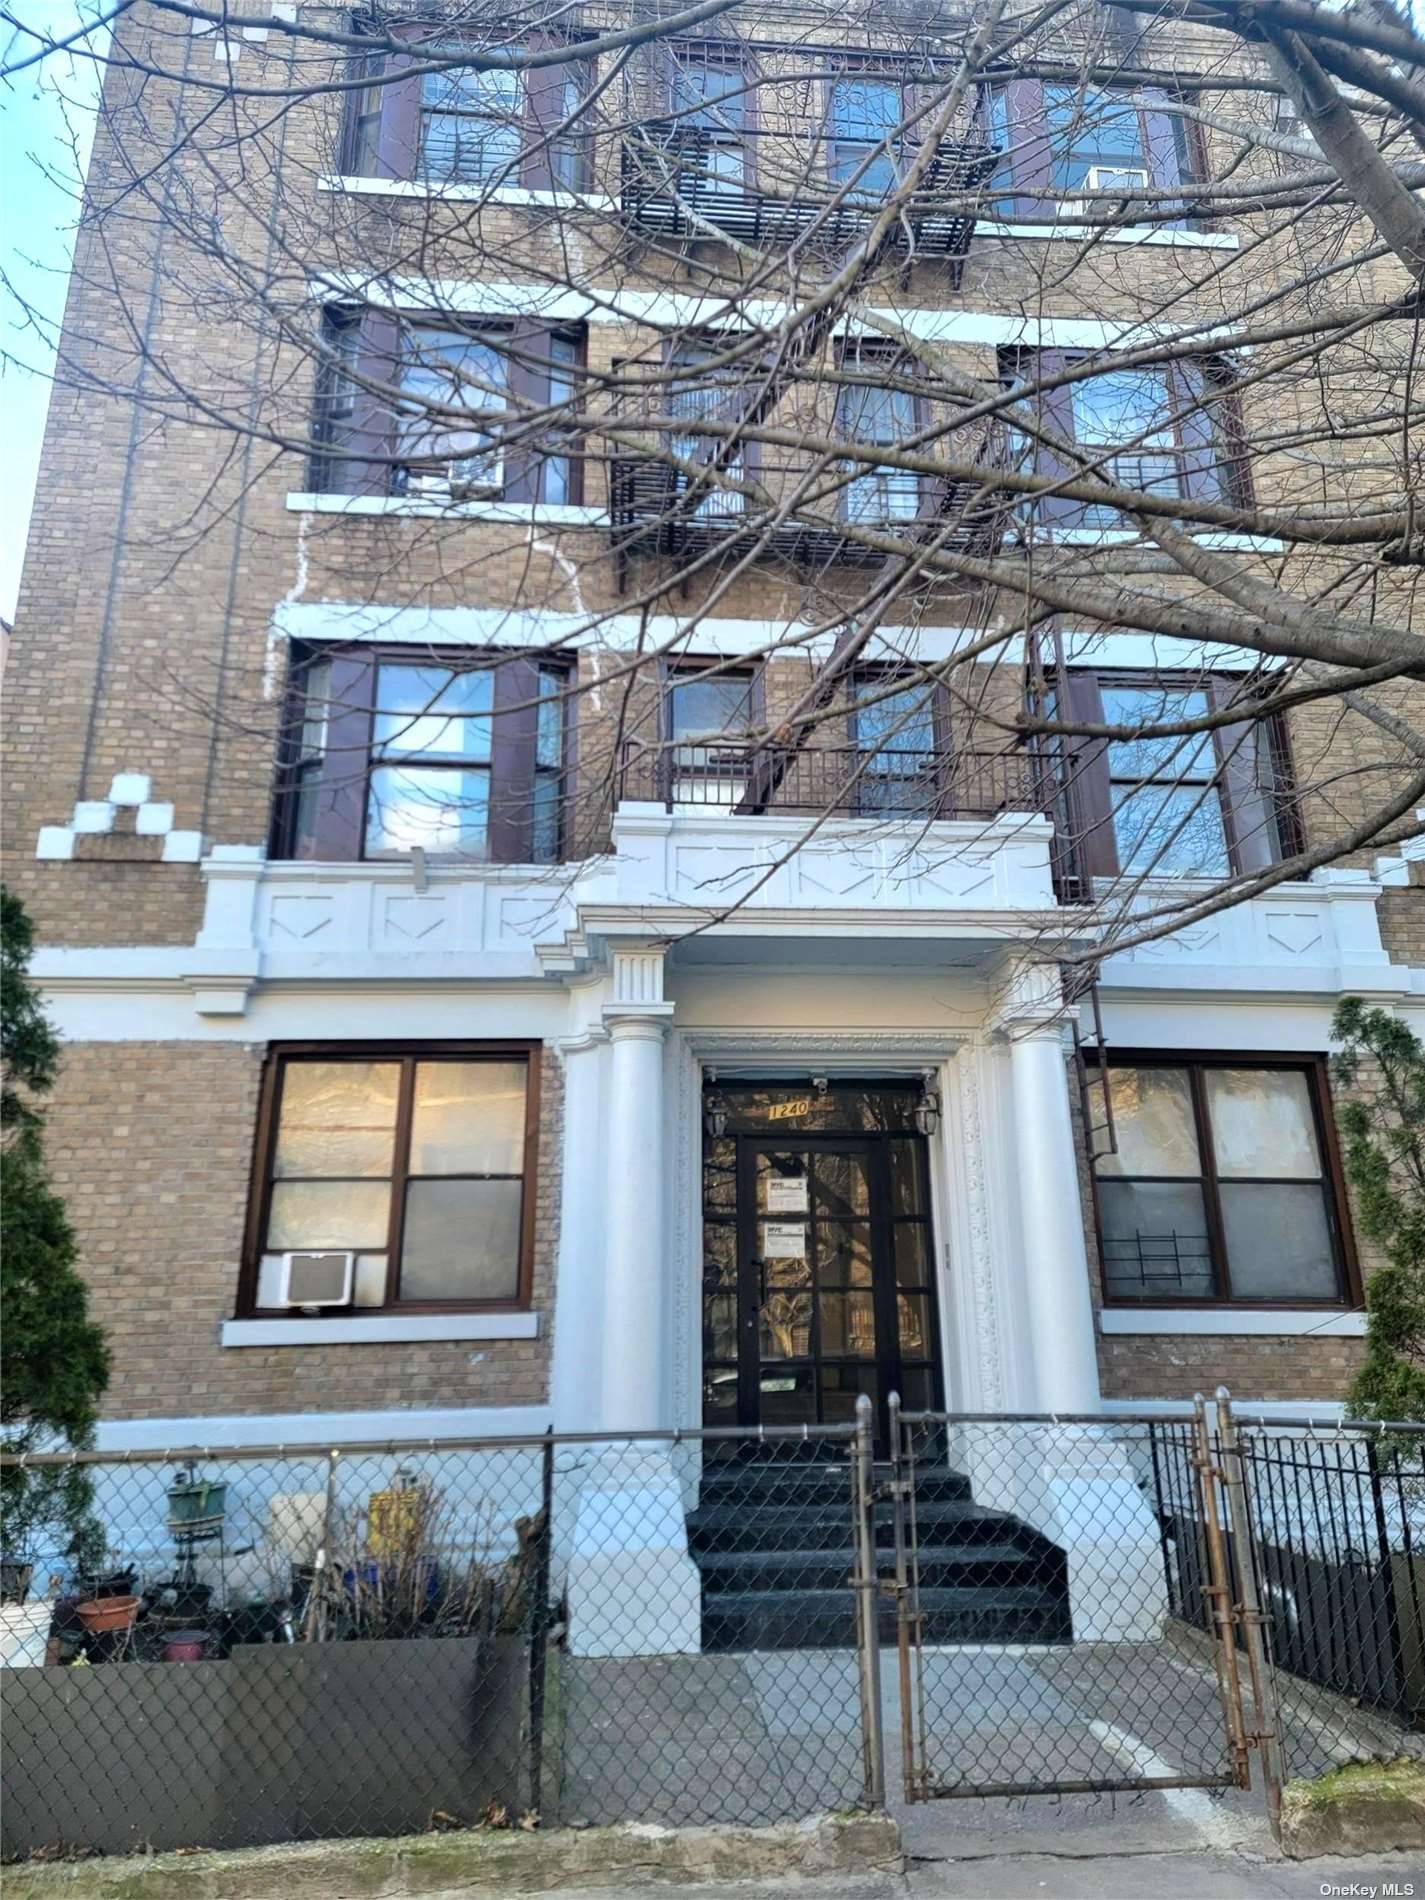 Welcome to 1240 Union Street, a charming 16 unit apartment building in the heart of vibrant Prospect Lefferts Gardens, Brooklyn.